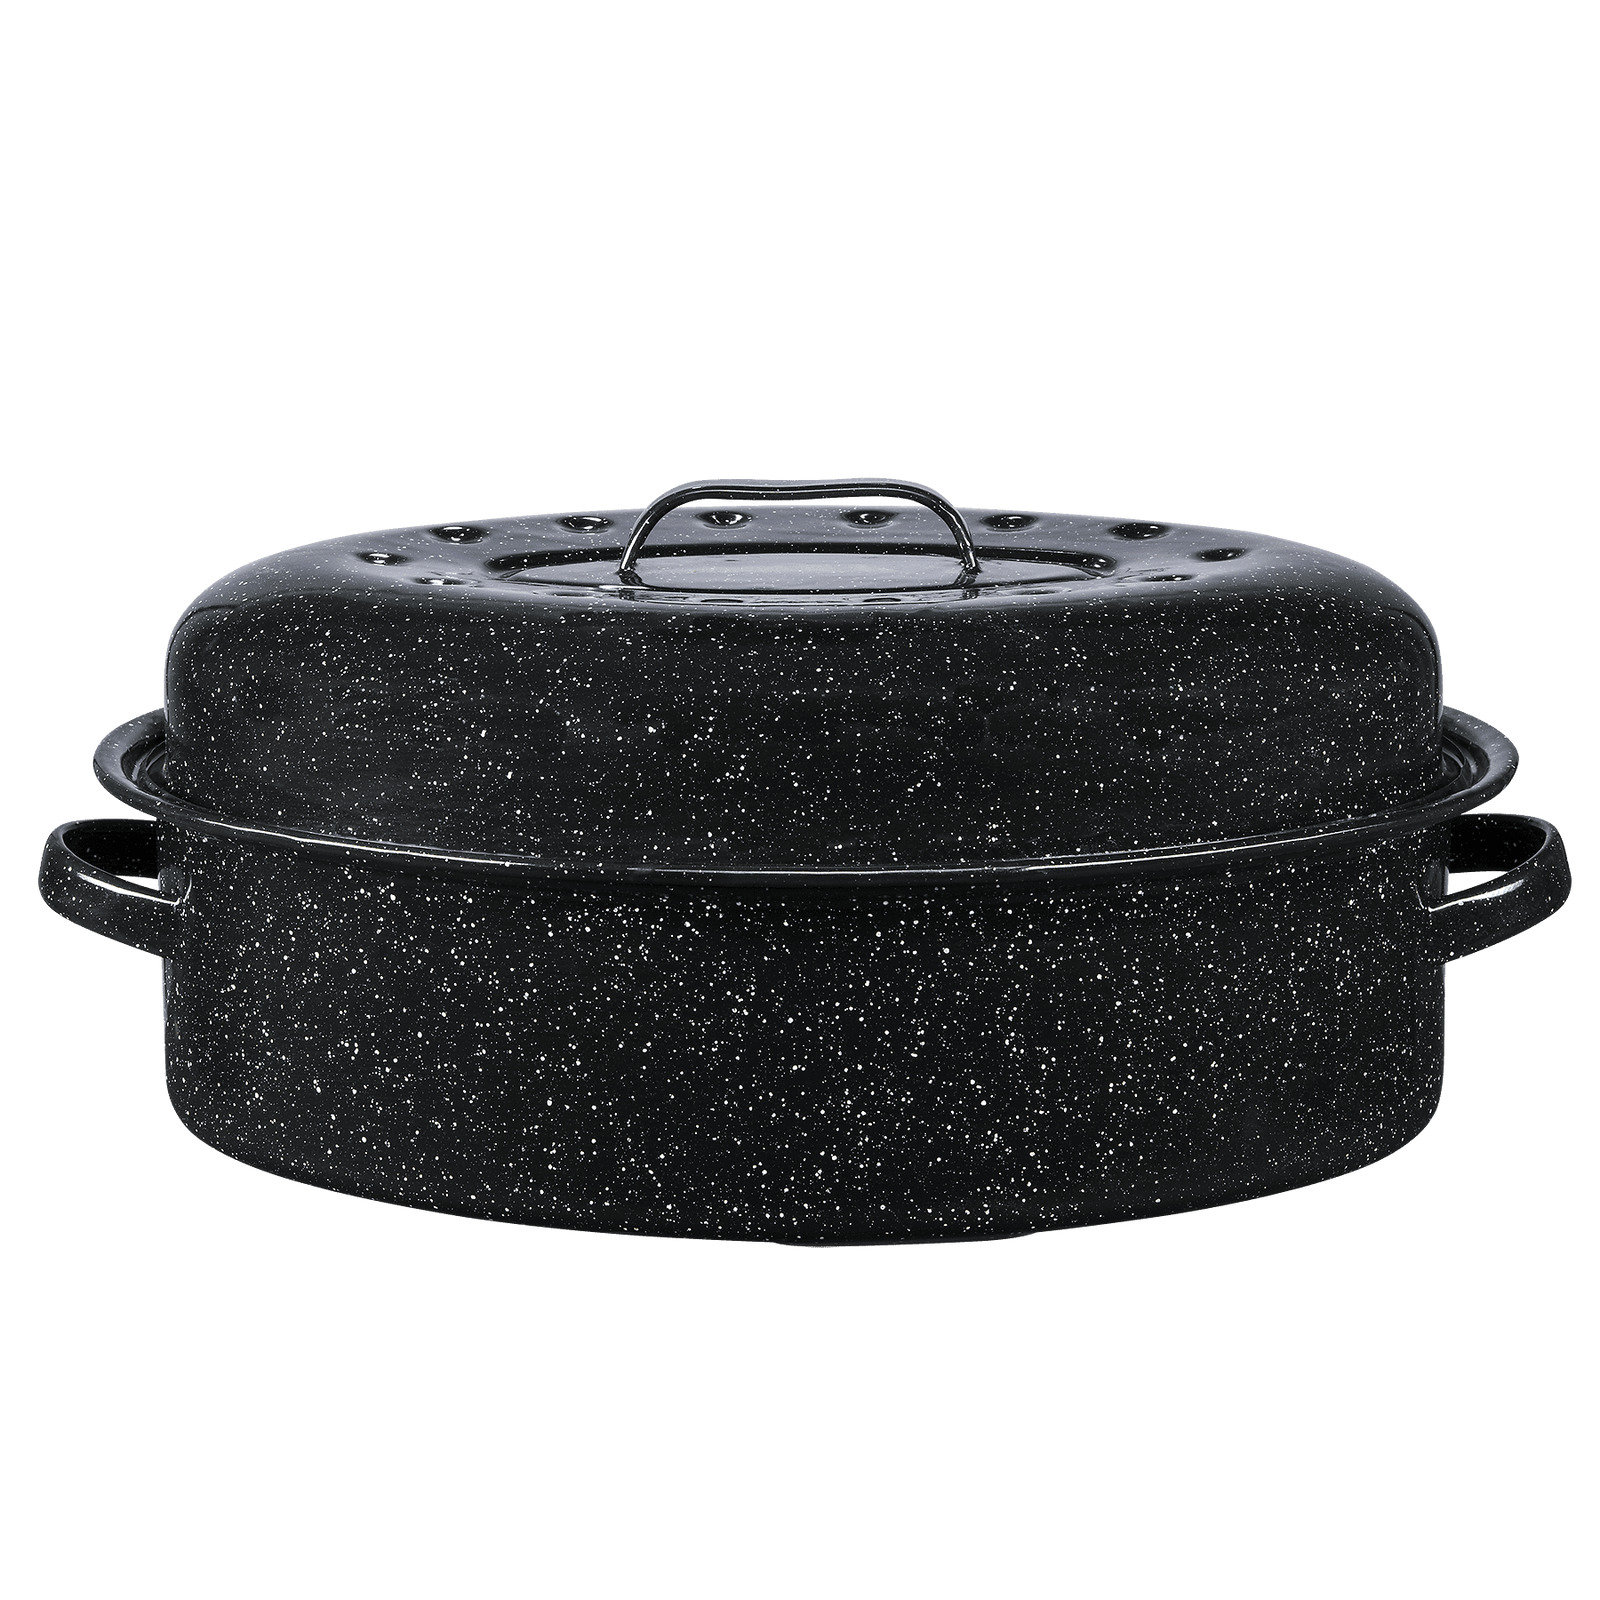 18” Granite non-stick Roaster Pan, Enameled Roasting Pan with Domed Lid Cookware